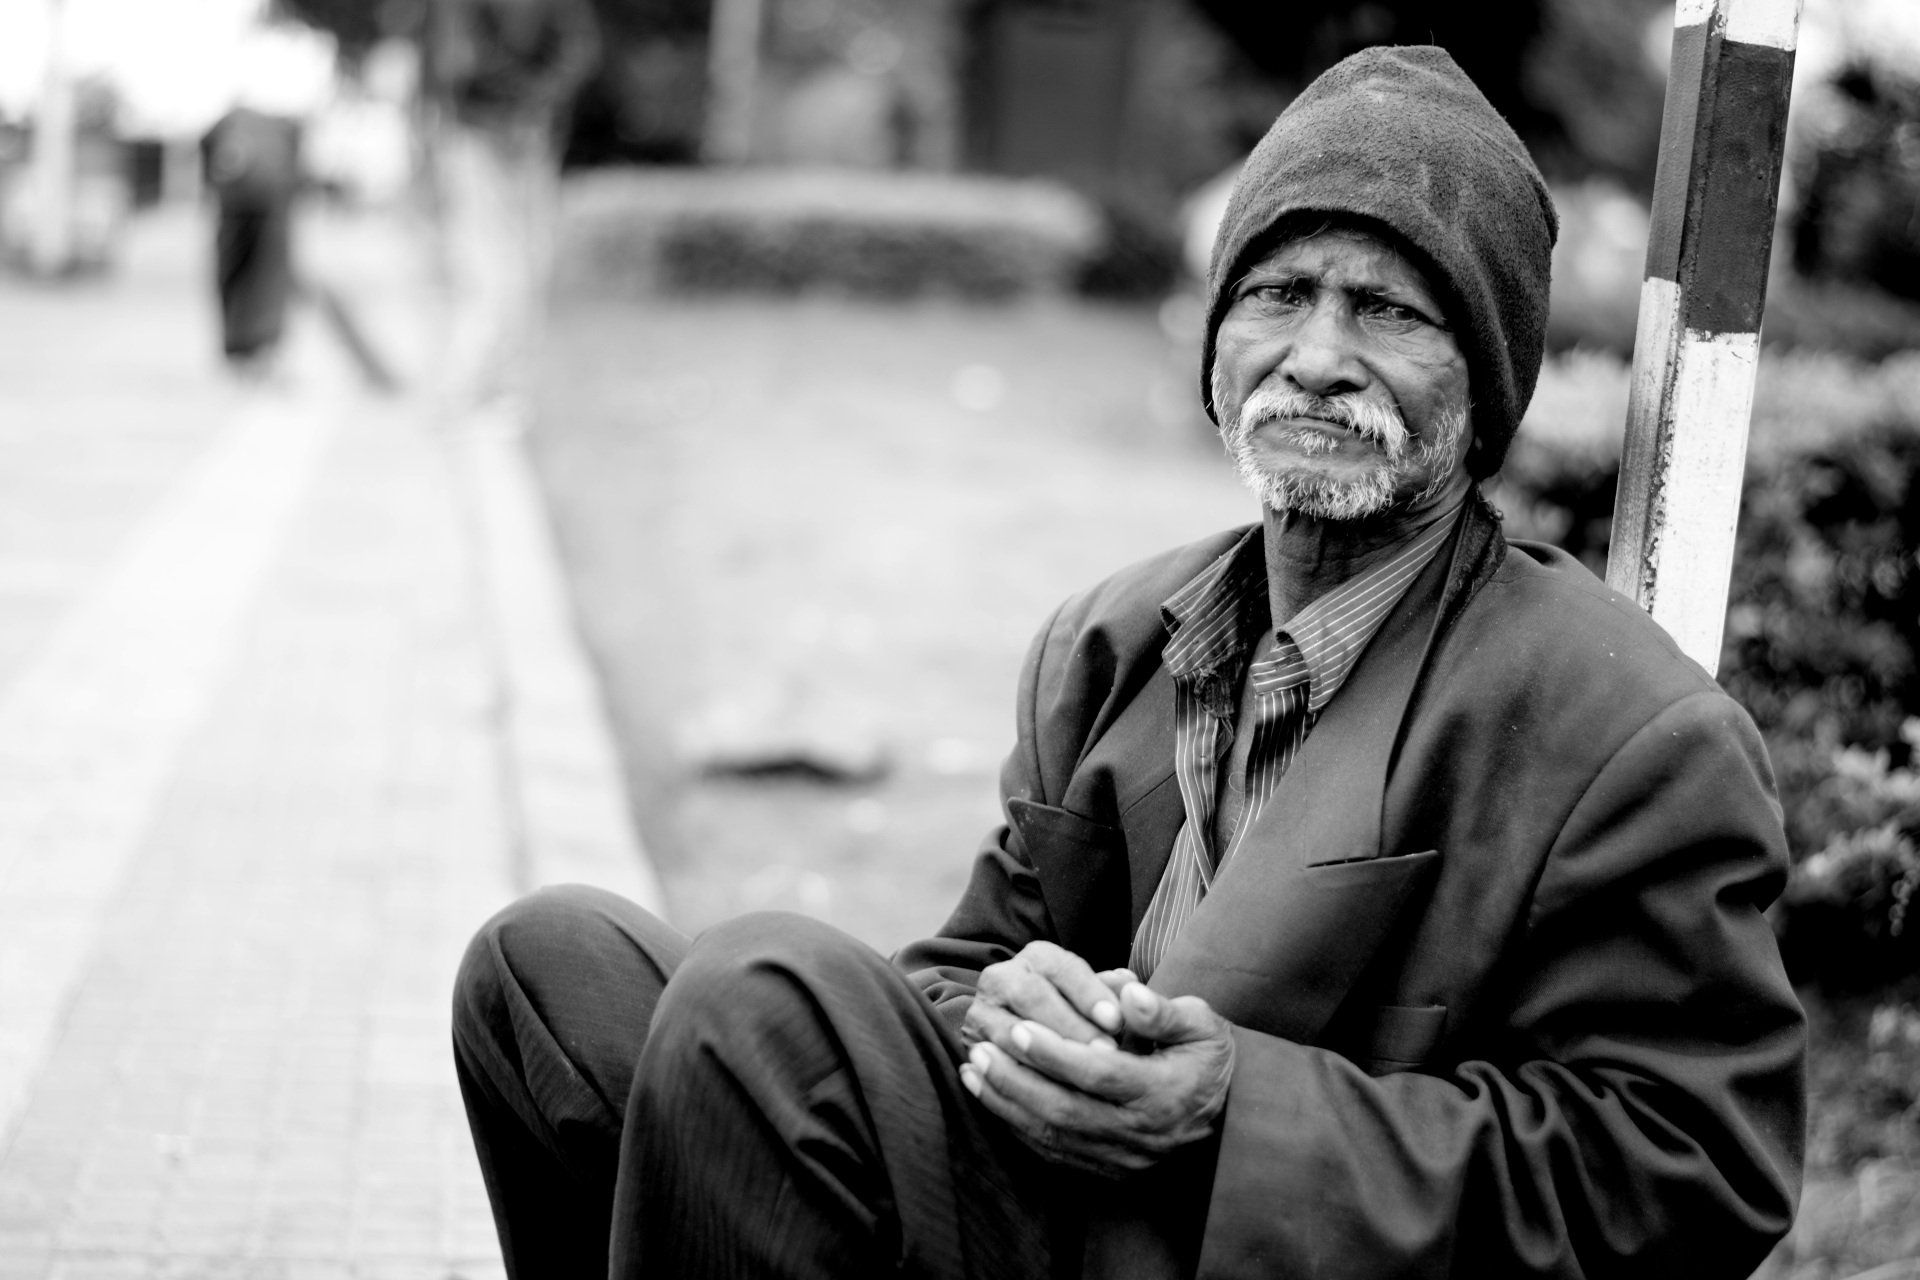 A black and white photo of an elderly man sitting on the sidewalk.